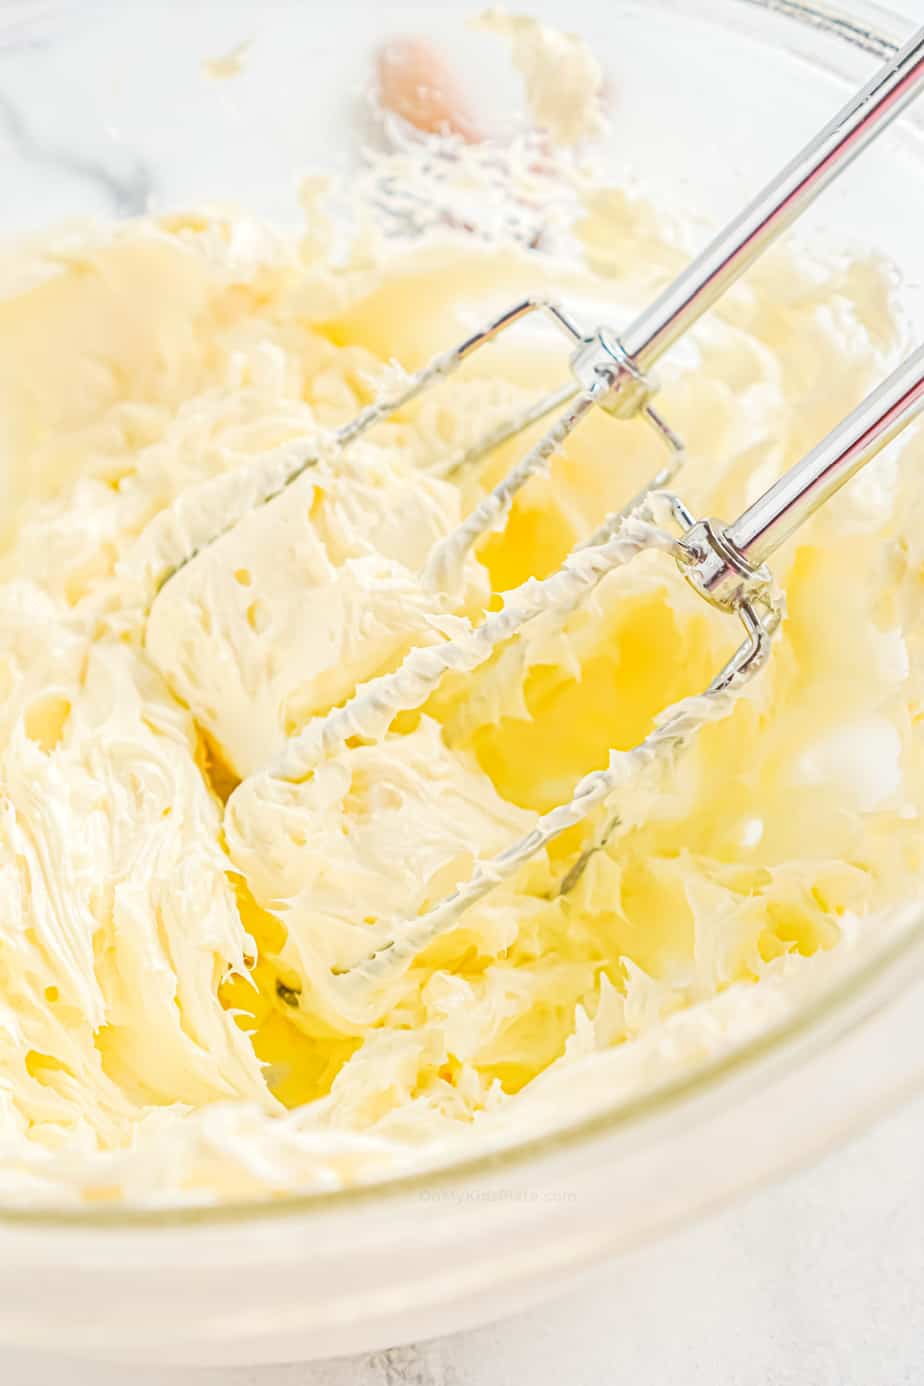 Butter and cream cheese being beaten with a hand mixer in a bowl close up